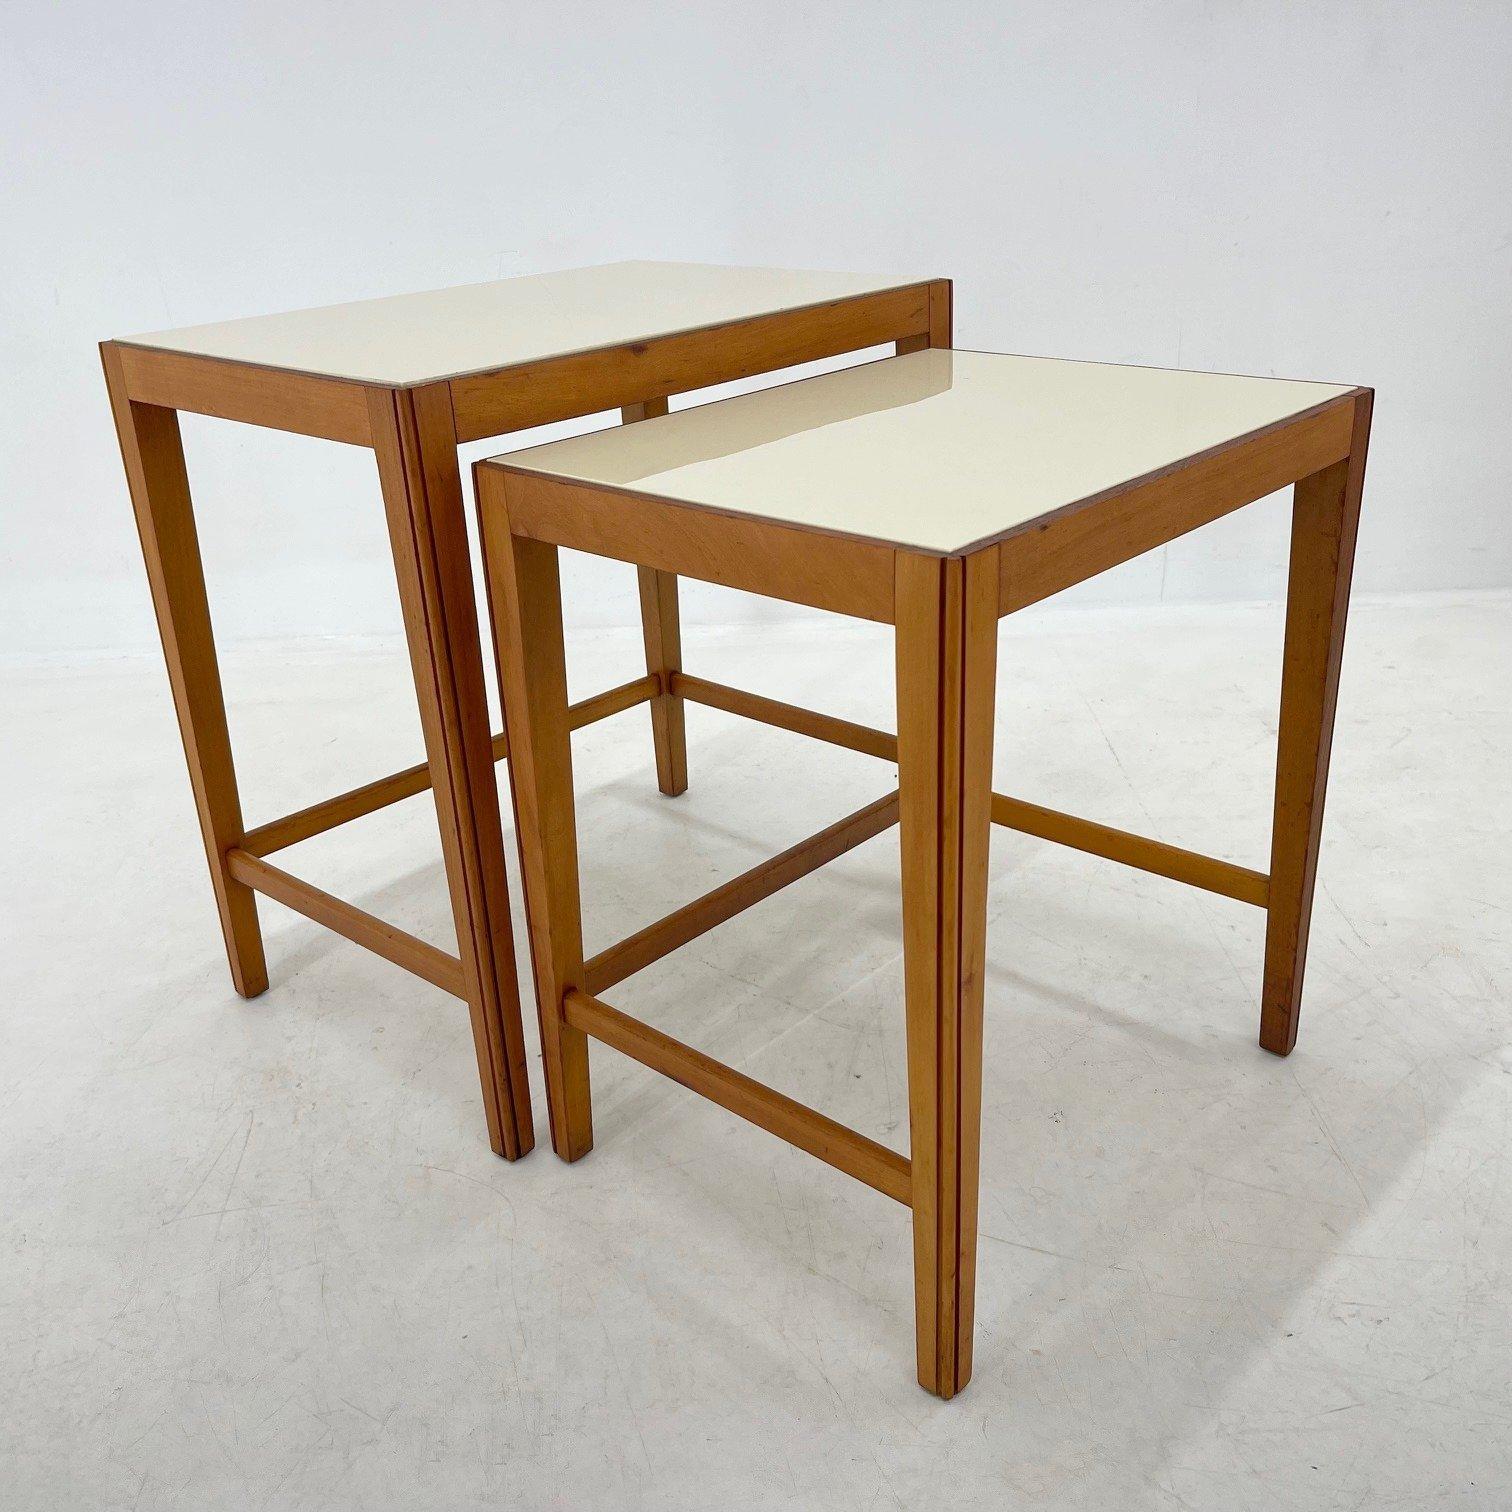 Set of two nesting tables. The top is made of ceramic, wooden parts were carefully refurbished.